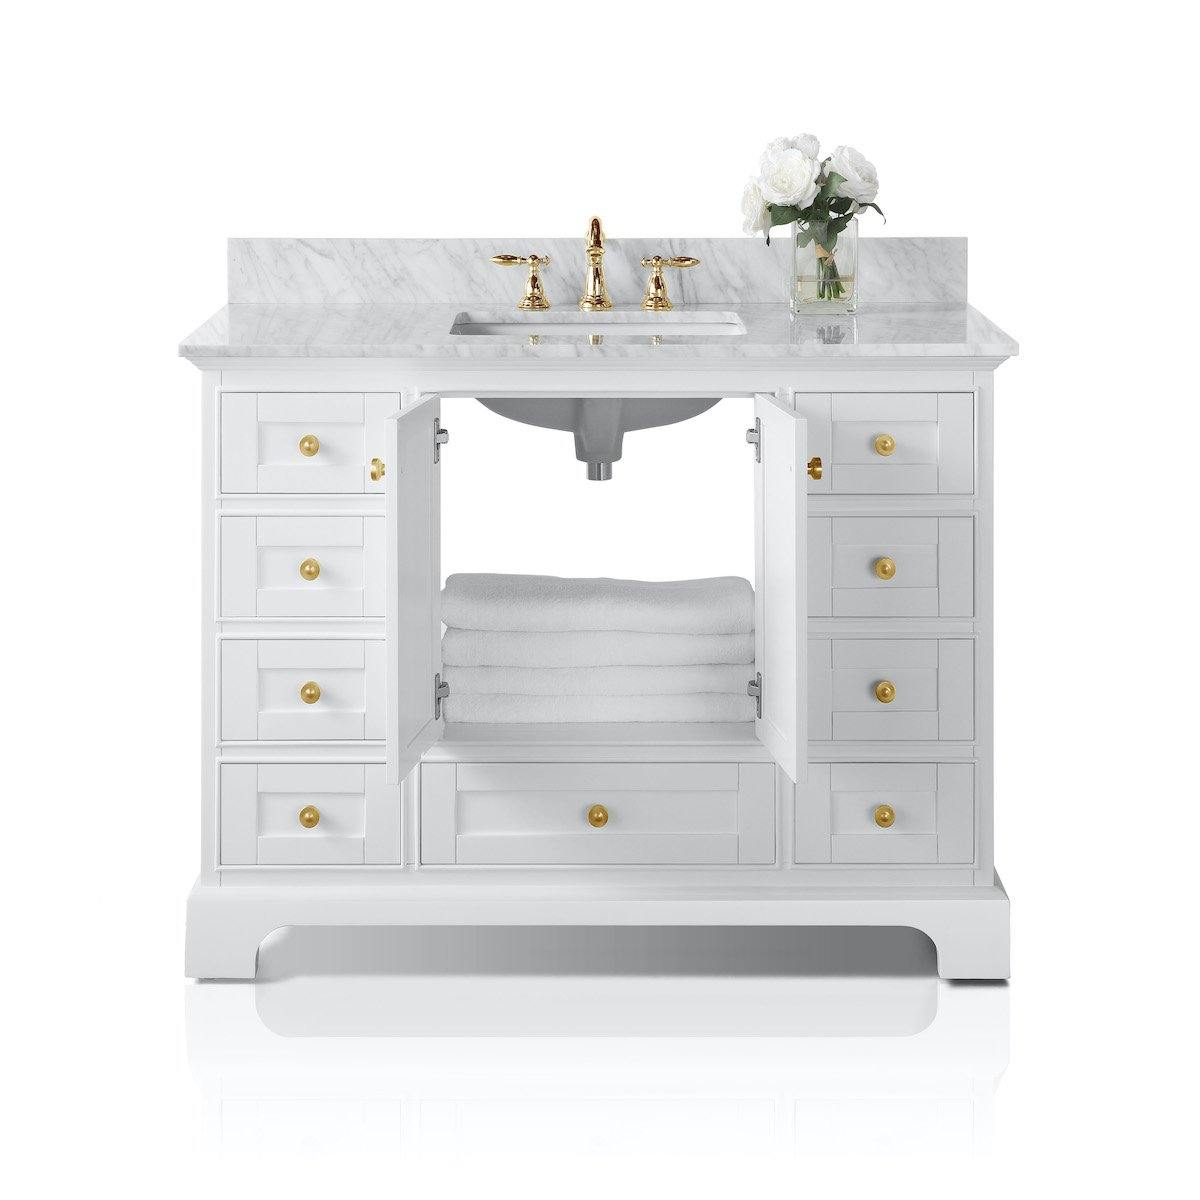 Ancerre Designs Audrey 48 Inch White Single Vanity Open Cabinets